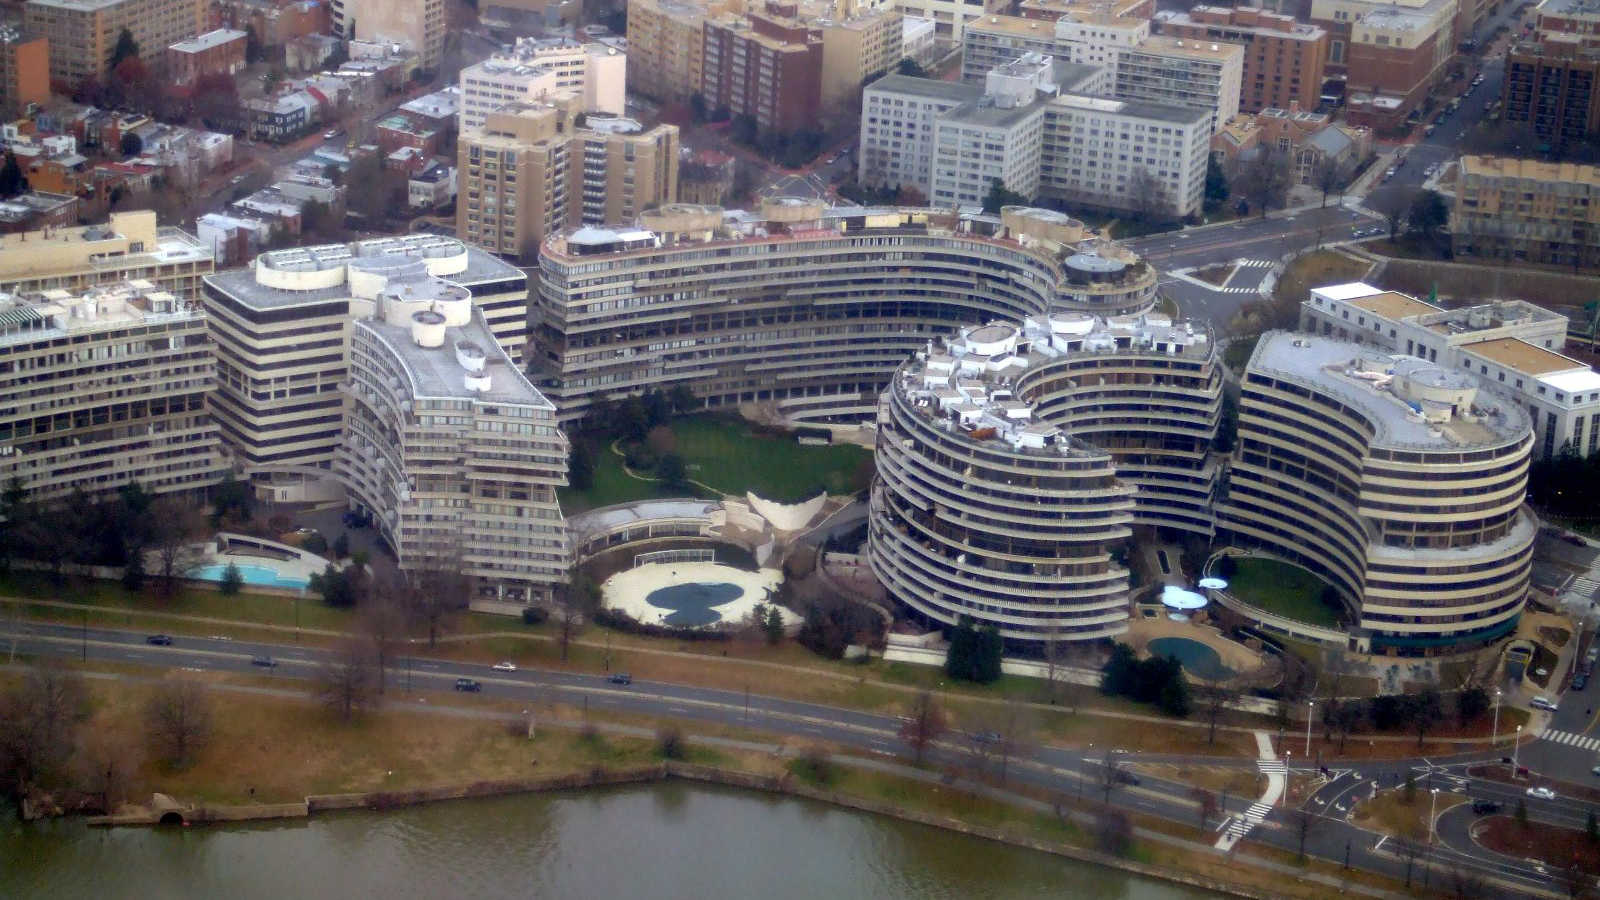 Watergate Complex from the Air